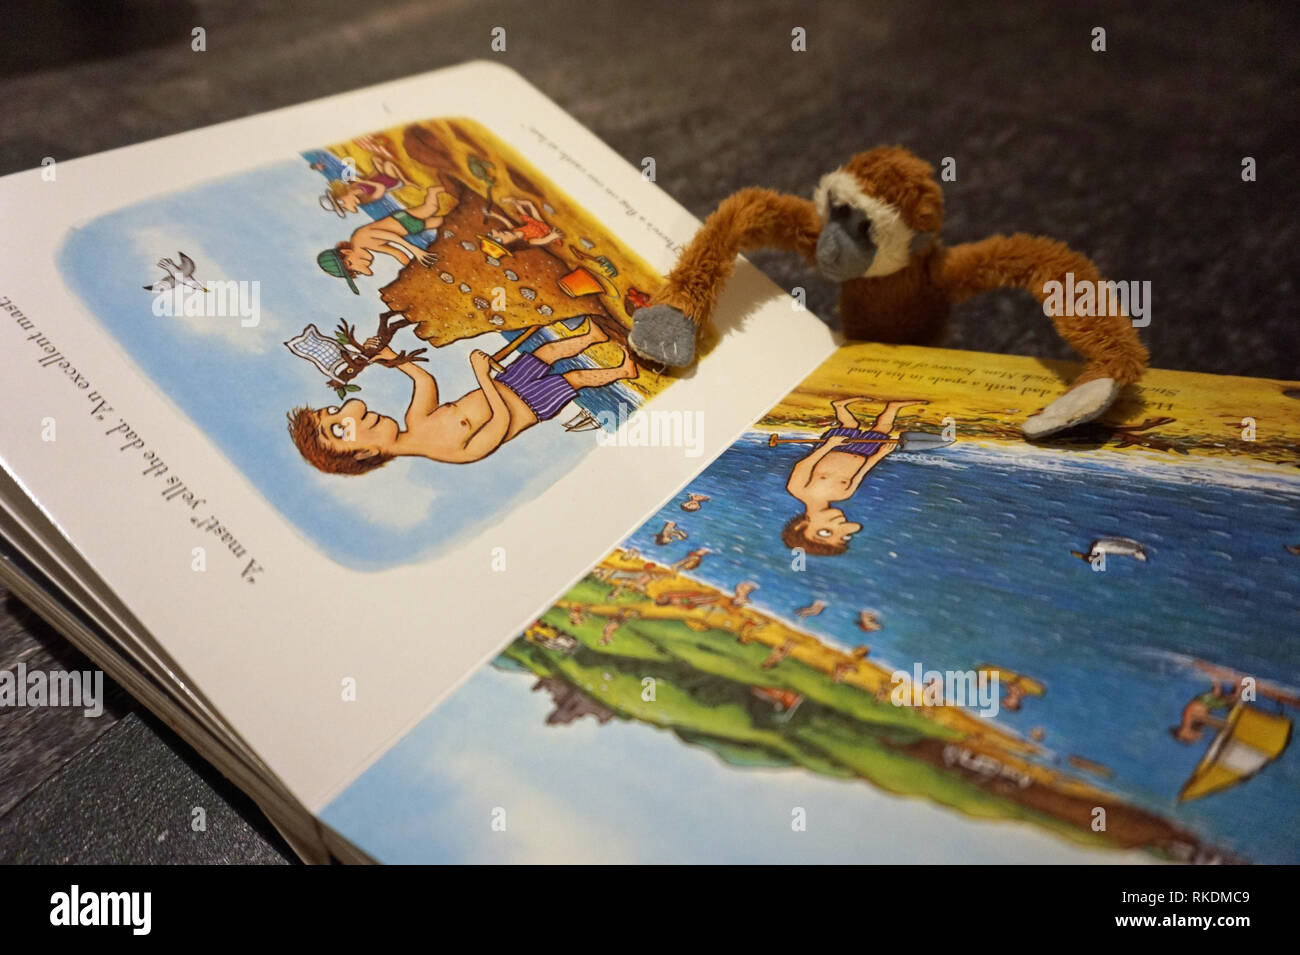 Toy soft monkey reading a children's book Stock Photo